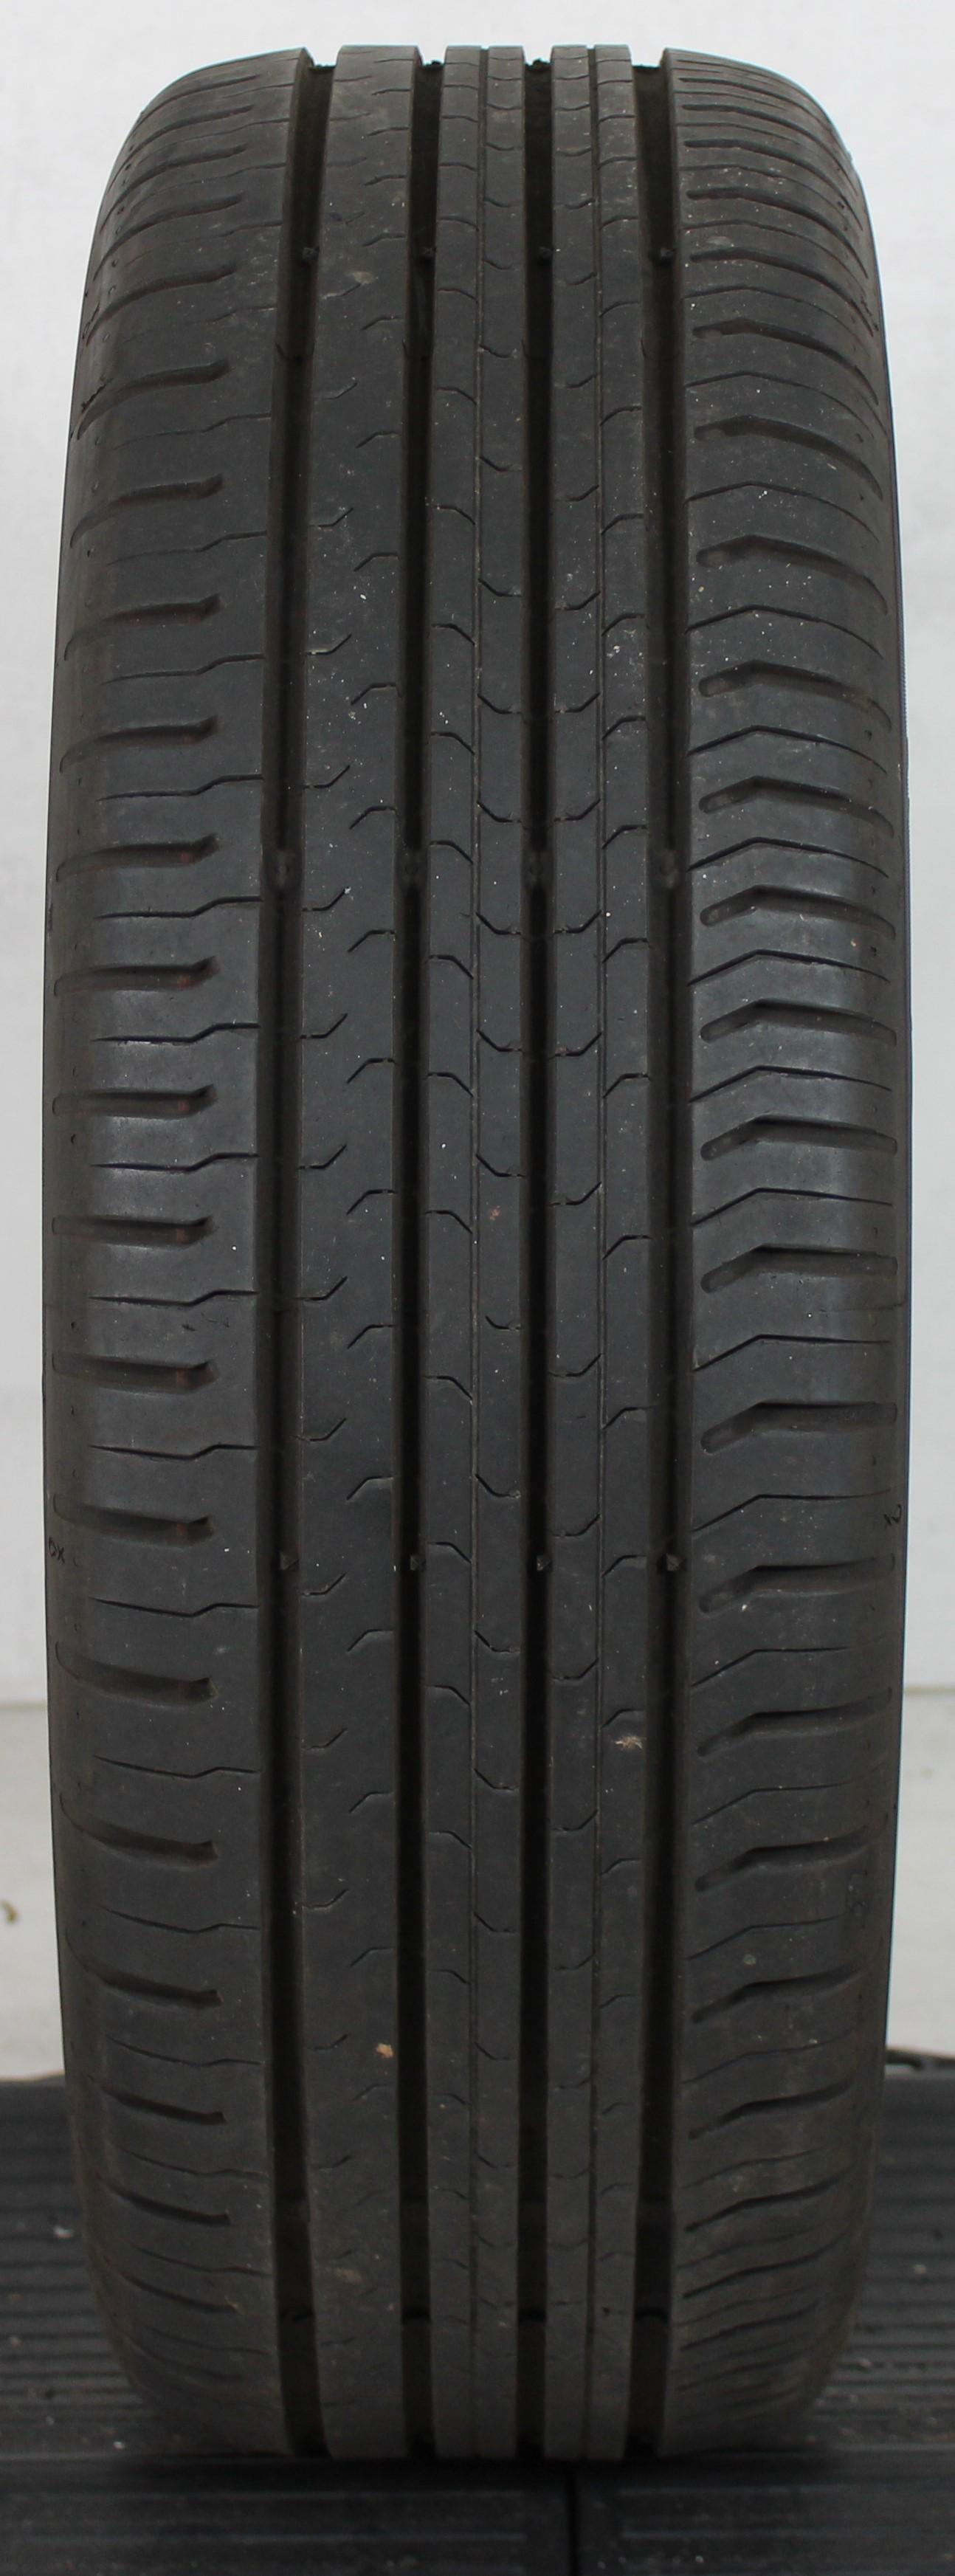 1 x 205/60R16 92V Sommerreifen Continental Eco Contact 5 MO 6,5-7mm 2019